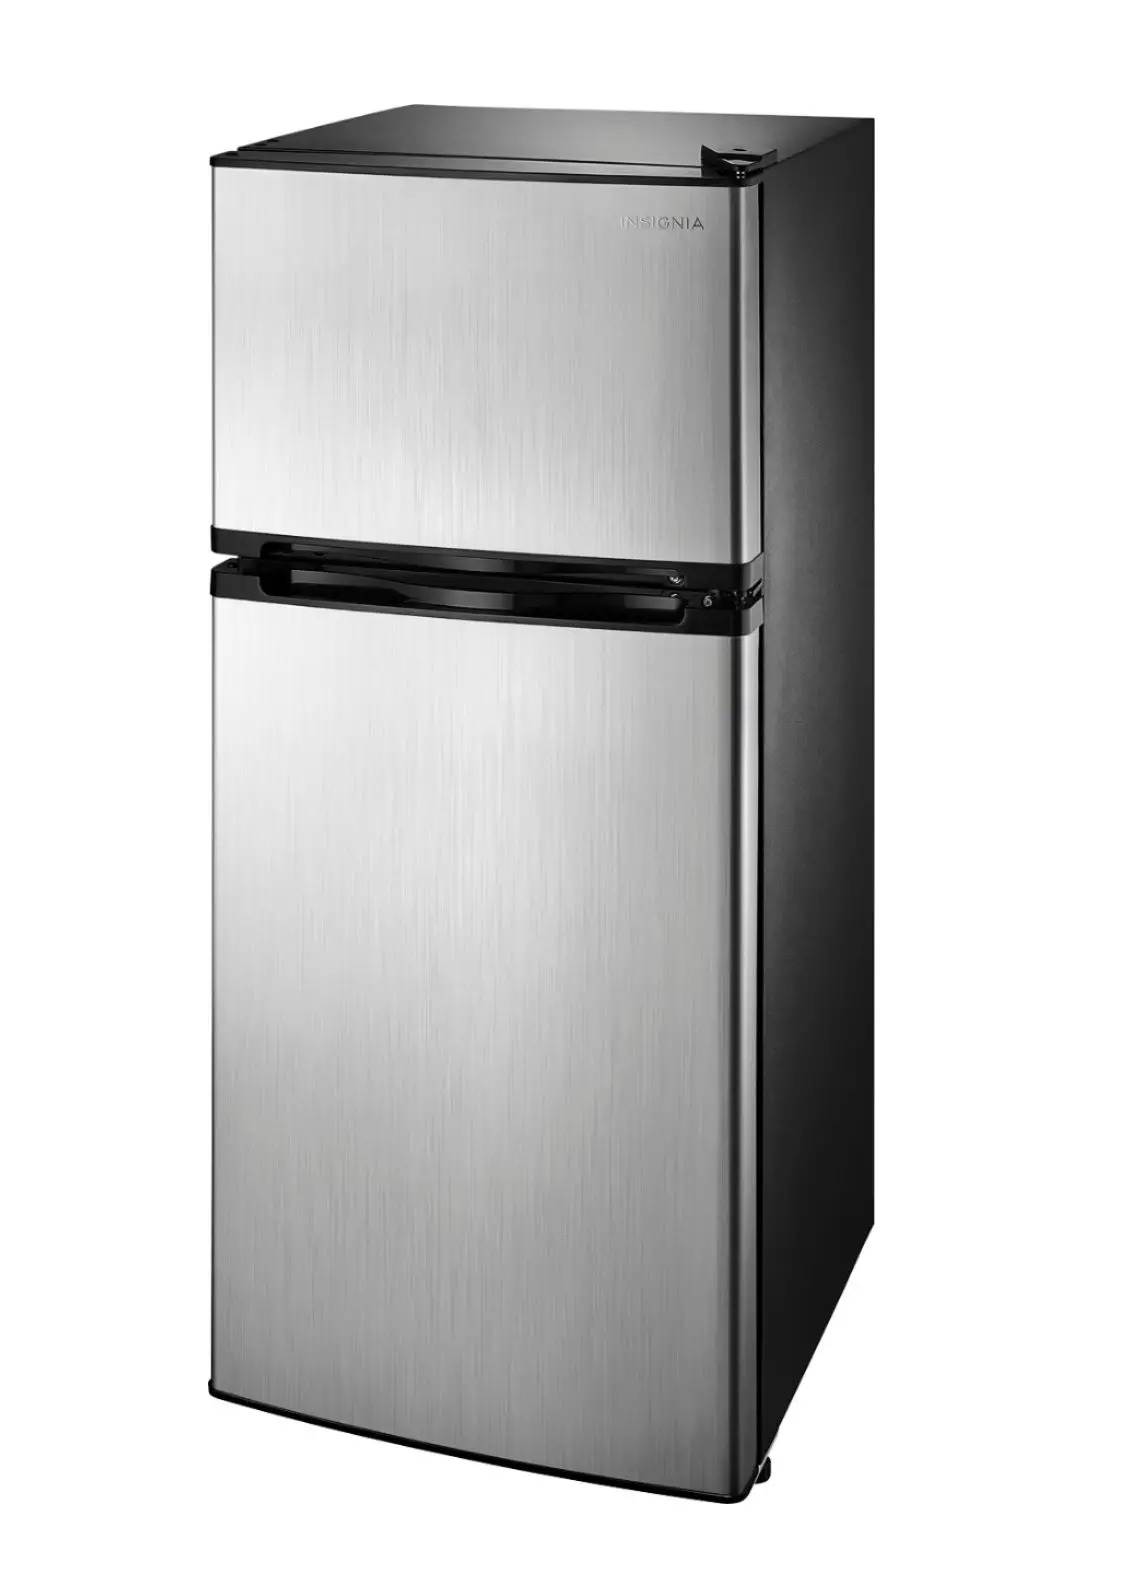 NS-CF43SS9 4.3 Cubic Foot Compact Refrigerator